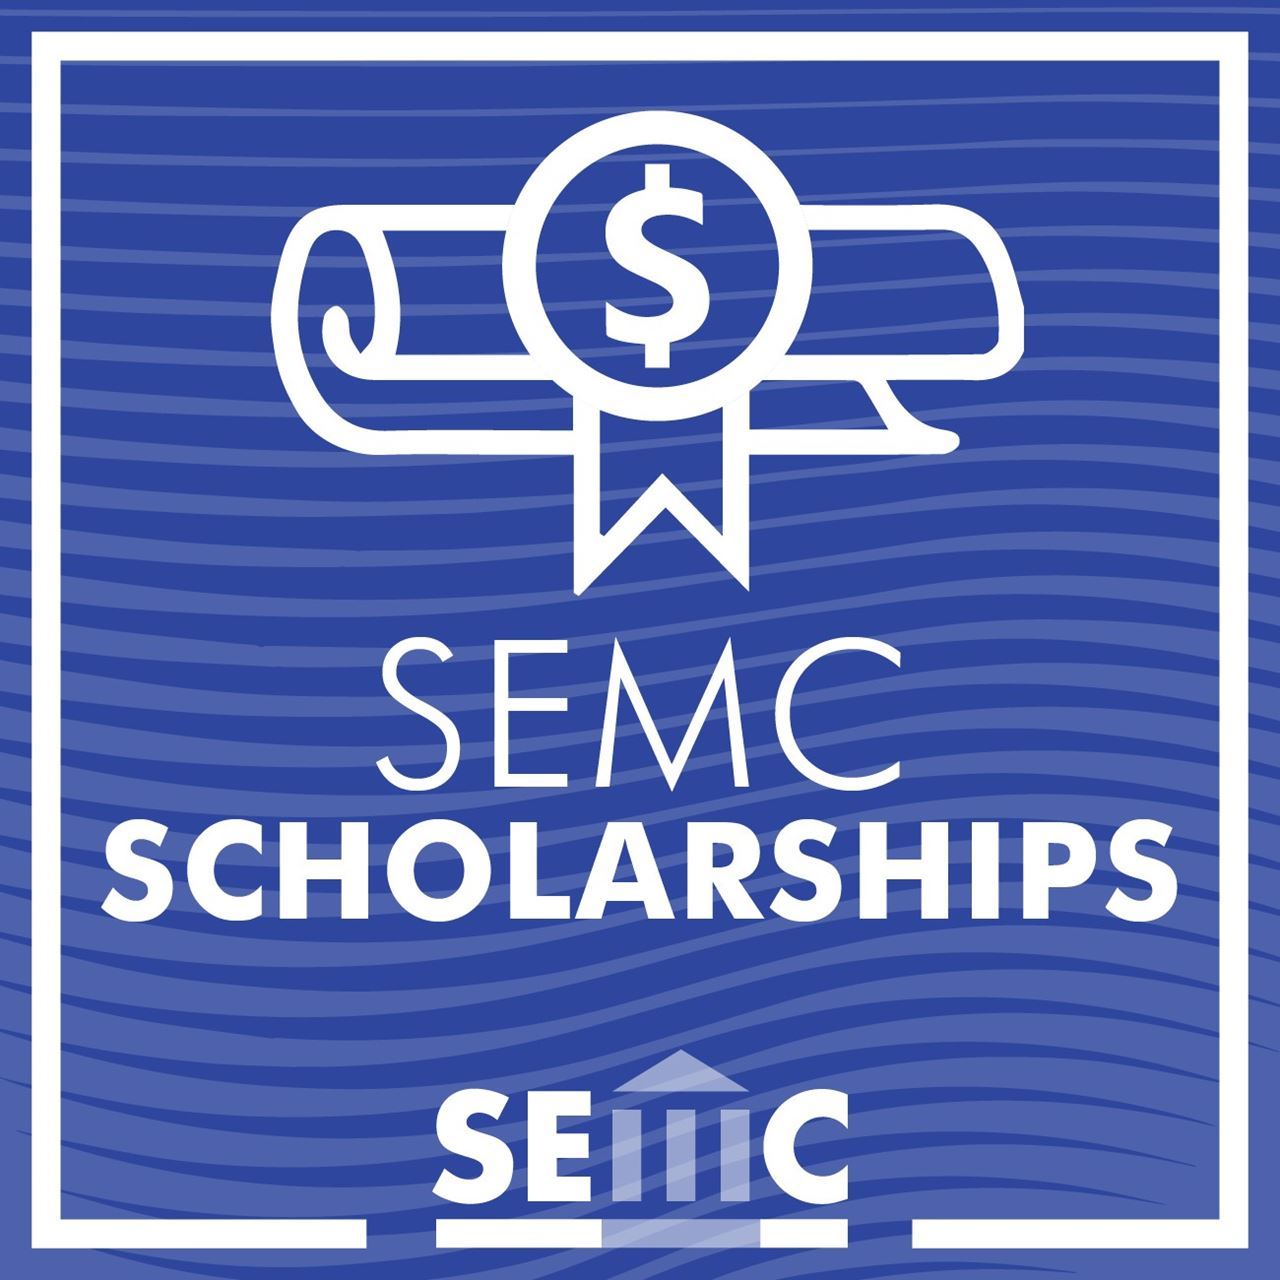 A dark blue striped background, with a rolled-up paper and money medallion. The words “SEMC Scholarship” are centered. The SEMC logo is also at the bottom. 